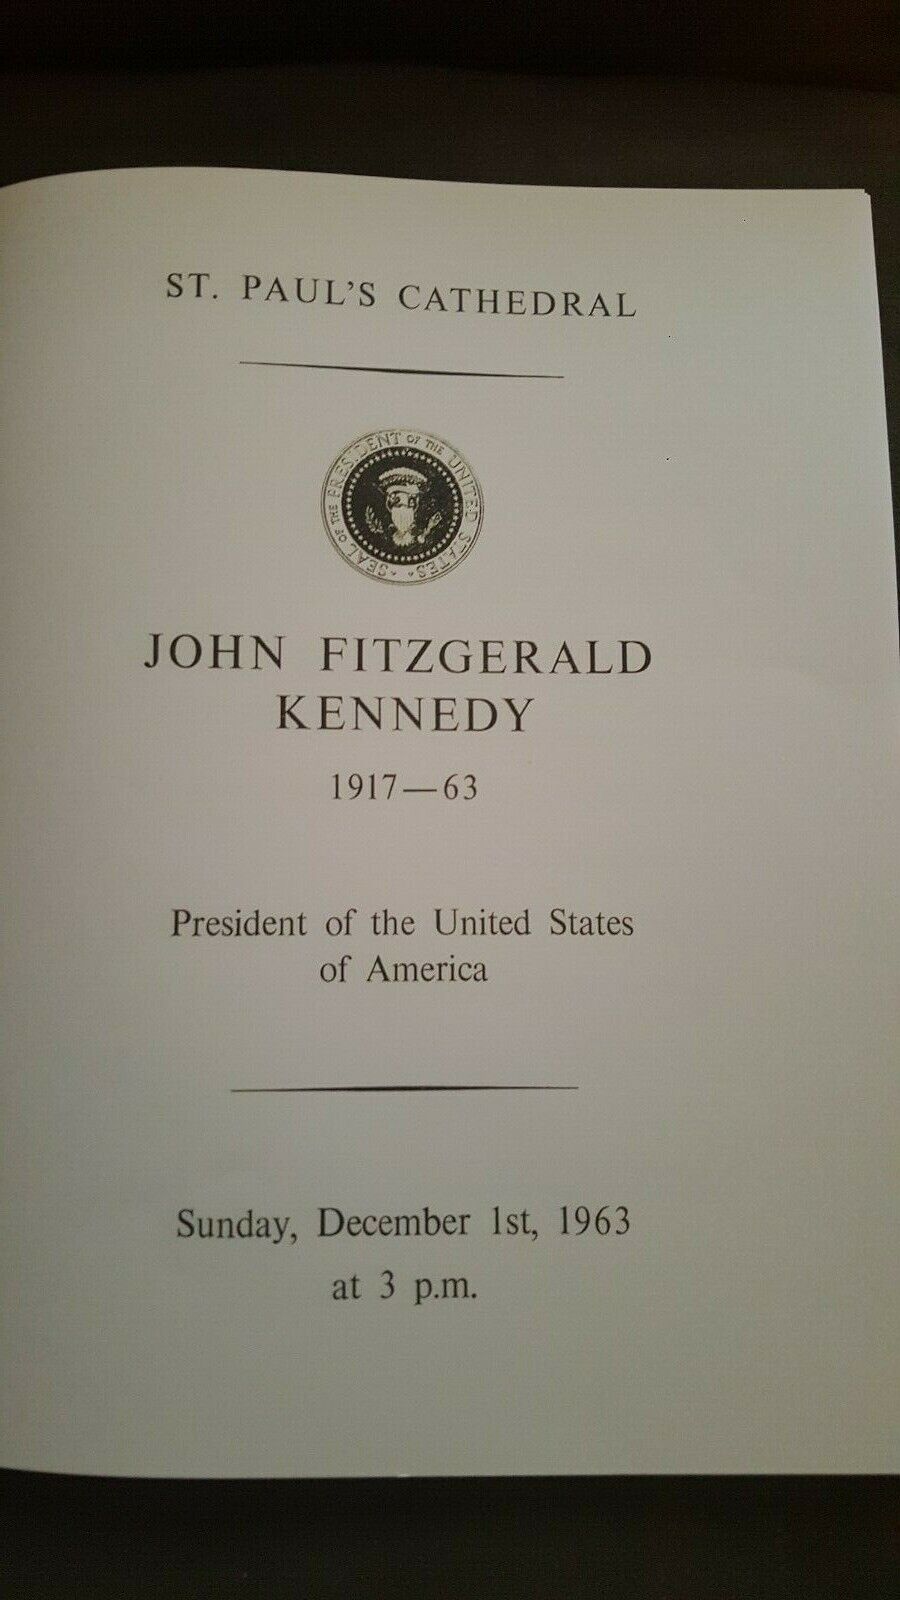 John Fitzgerald Kennedy  Memorial Program From St. Paul's Cathedral 